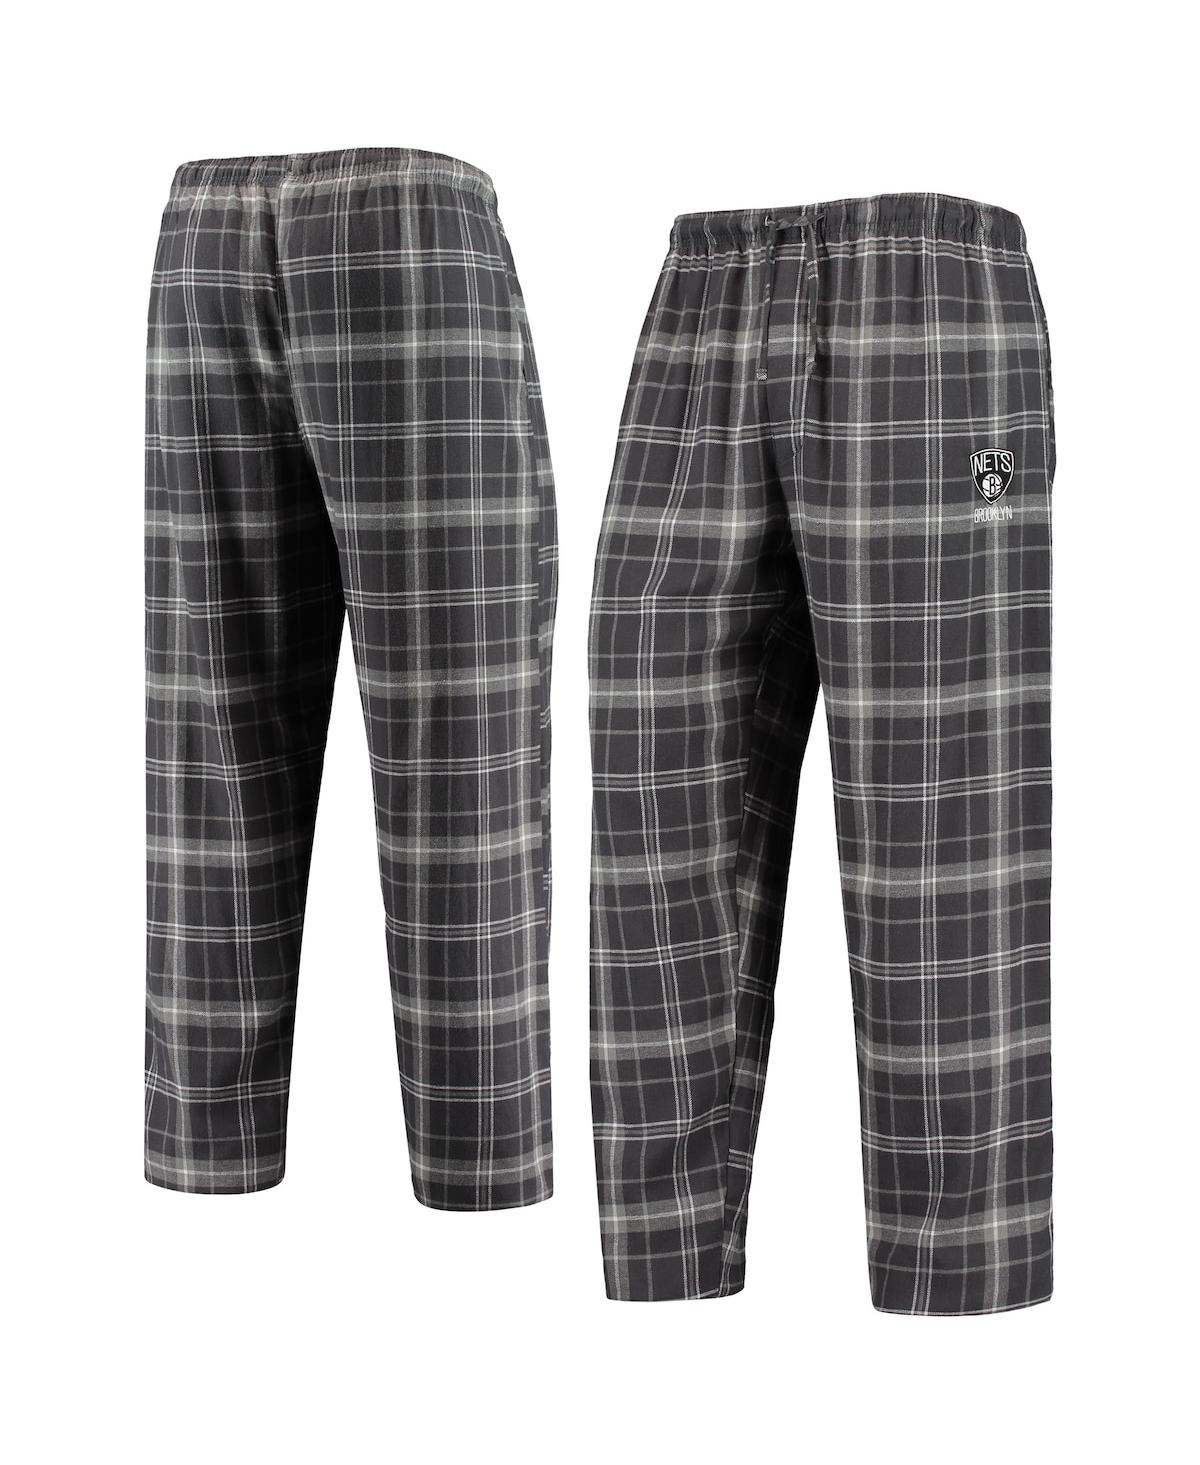 Men's Concepts Sport Charcoal, Gray Brooklyn Nets Ultimate Plaid Flannel Pajama Pants - Charcoal, Gray